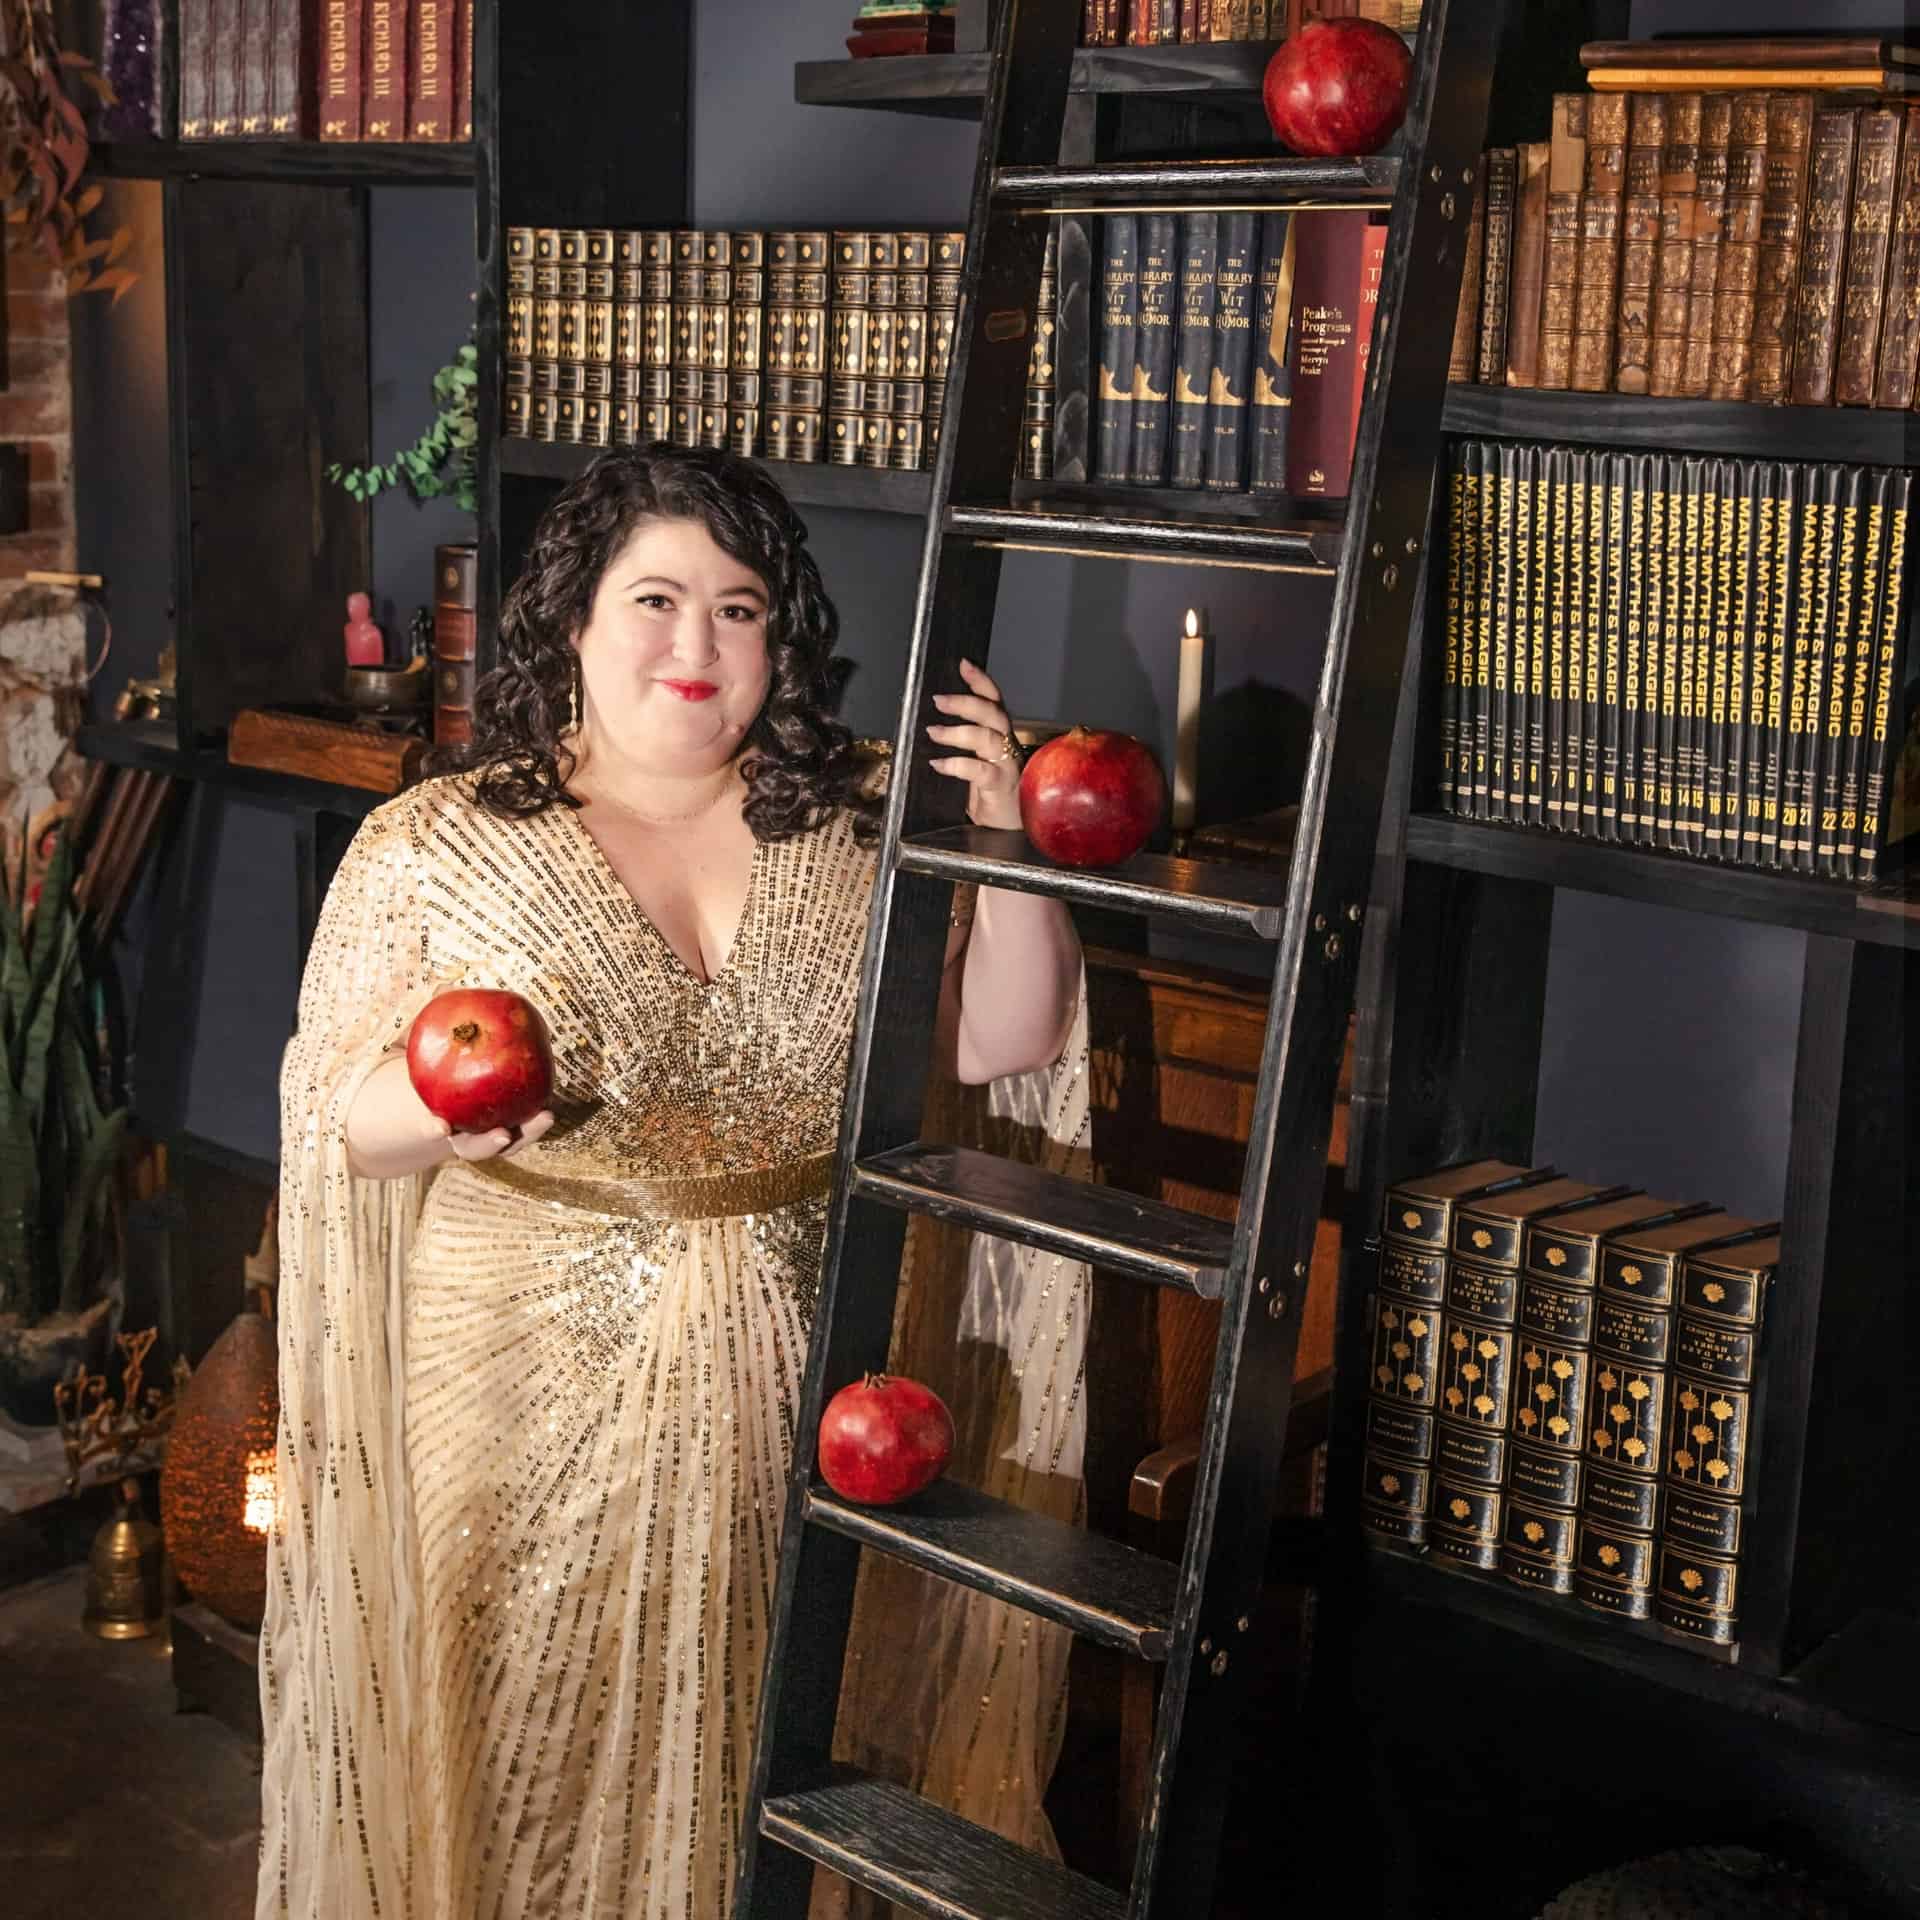 Kara Loewentheil holding a pomegranate in front of a bookshelf in a gold dress.